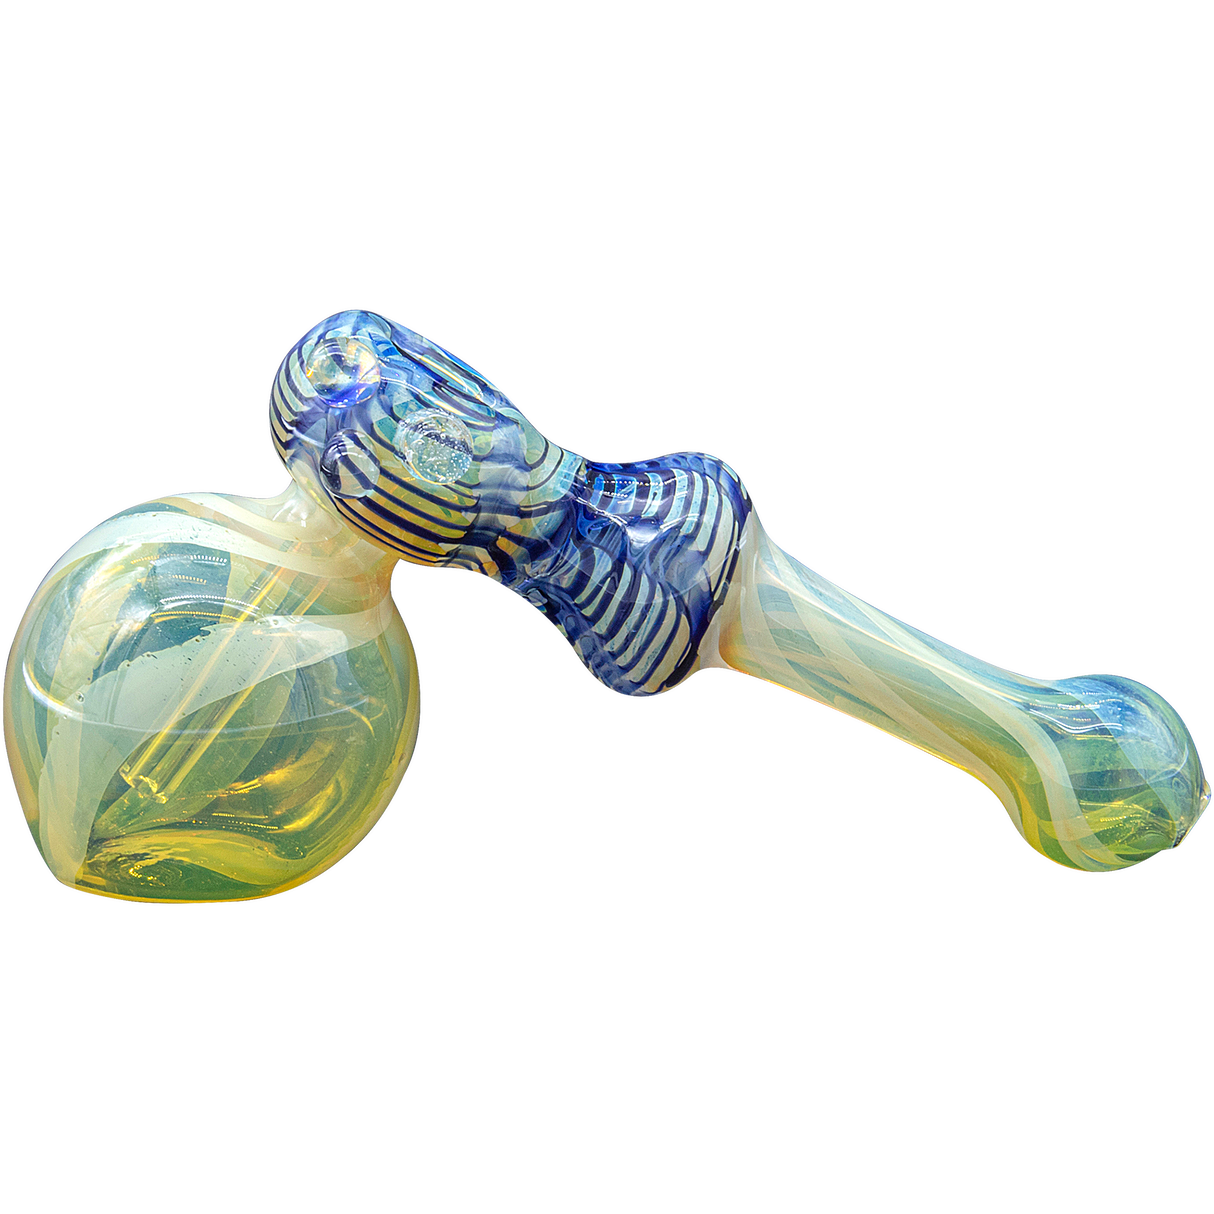 LA Pipes Raked Hammer Fumed Bubbler Pipe in Cobalt Blue, 6" Borosilicate Glass, Side View